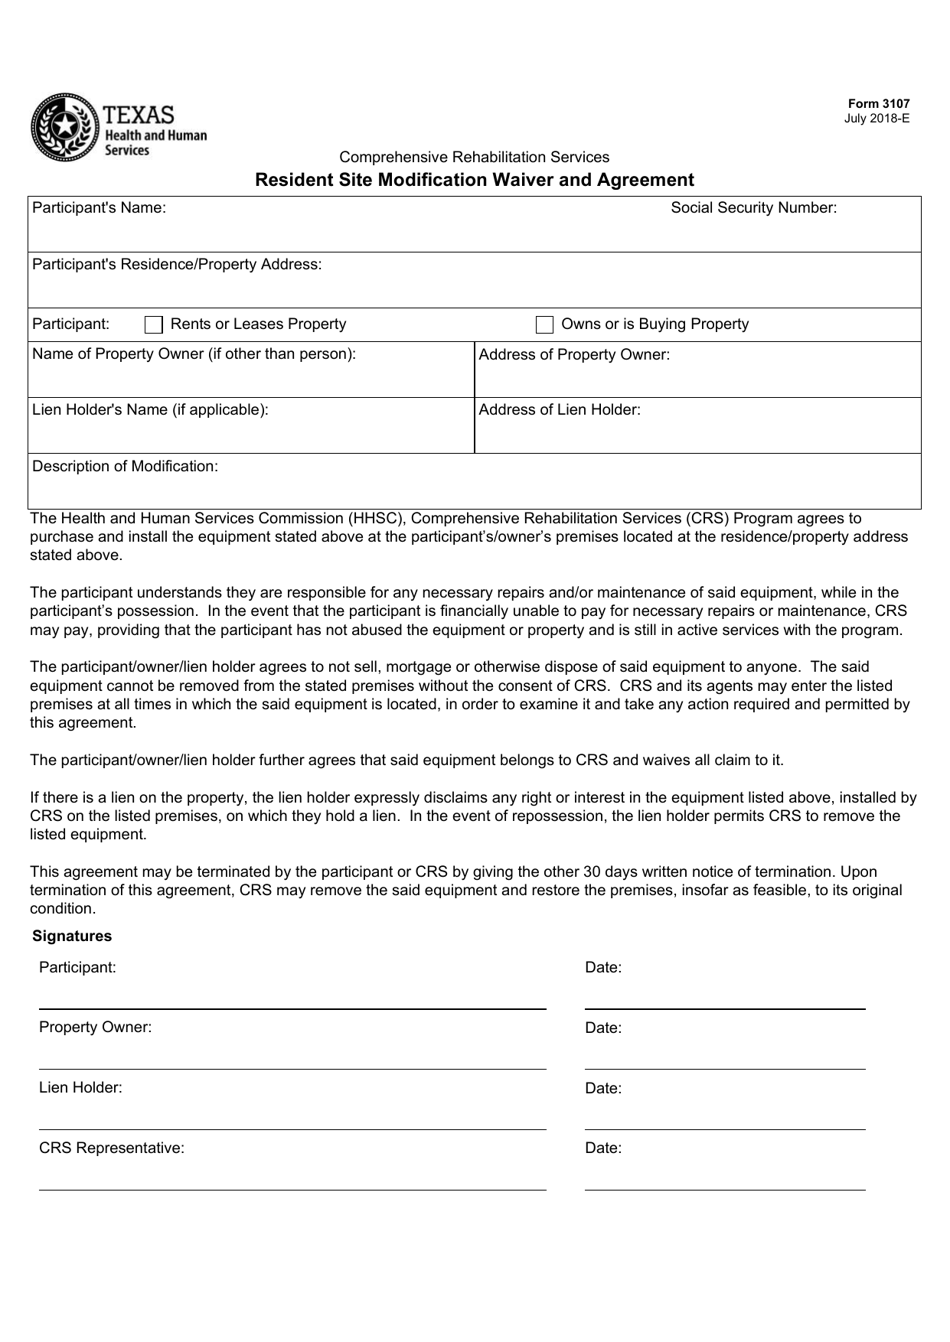 Form 3107 Resident Site Modification Waiver and Agreement - Texas, Page 1